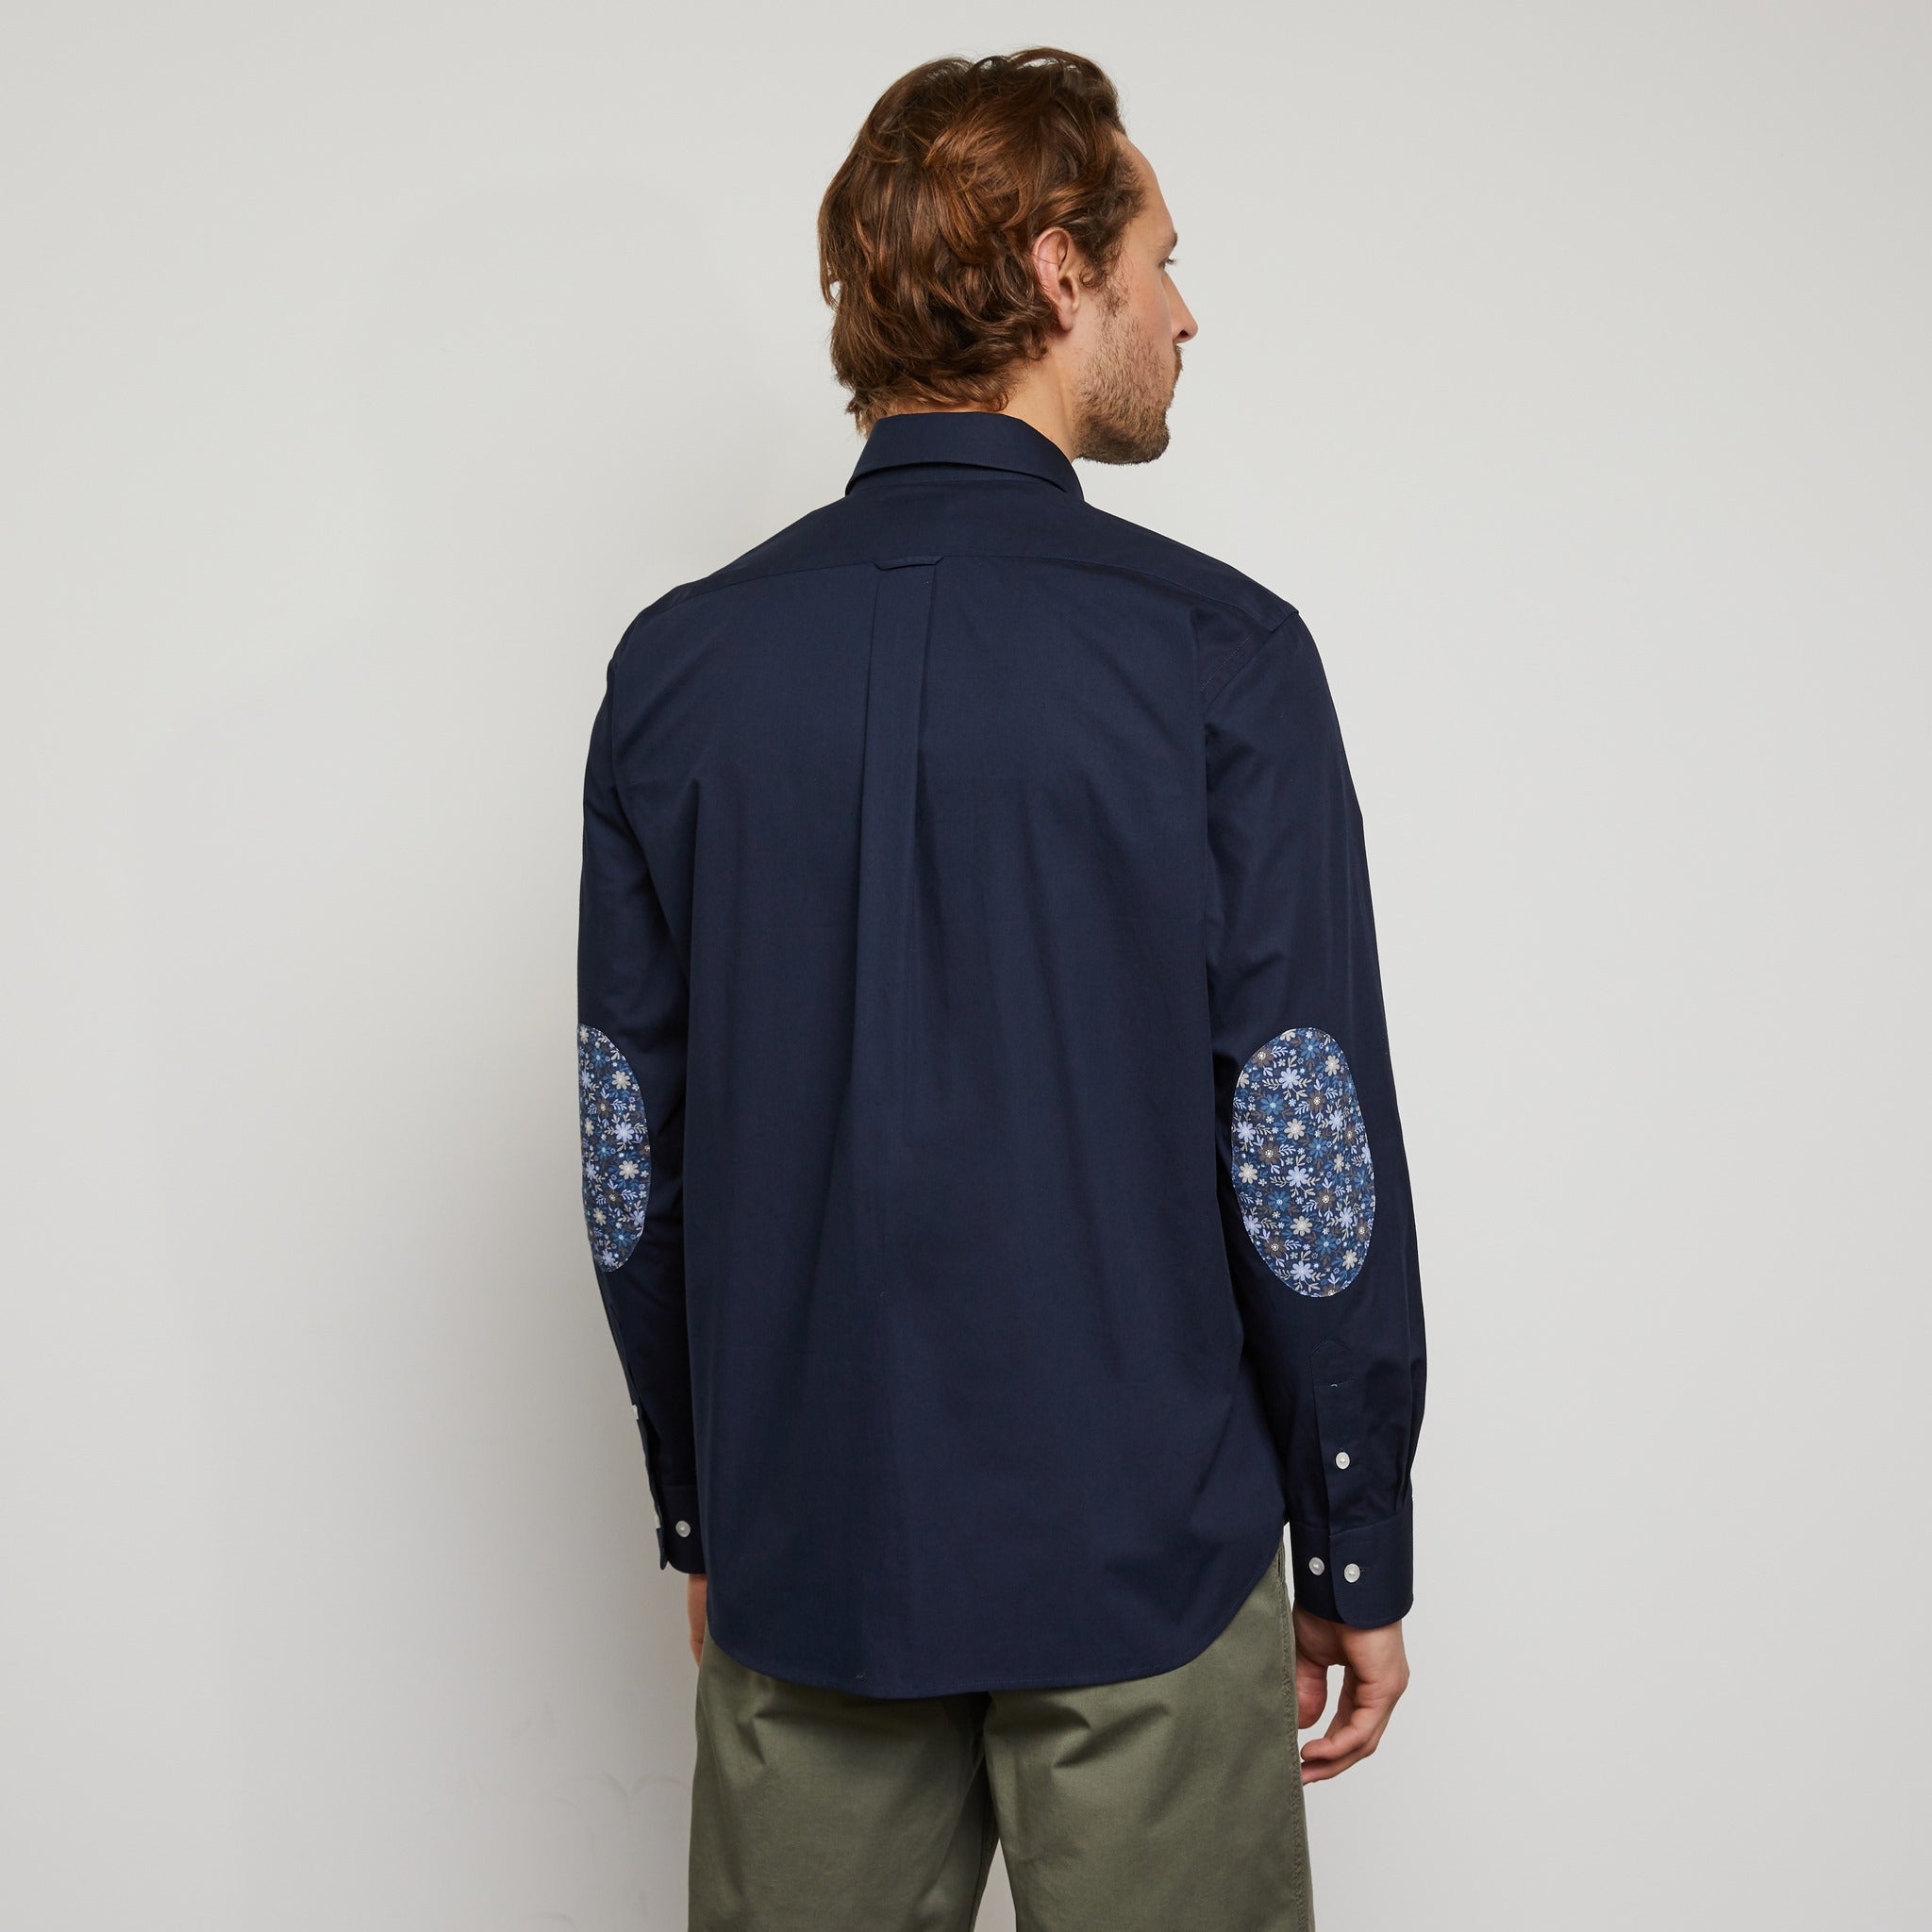 Dark Blue Shirt With Decorative Elbow Patches - 03